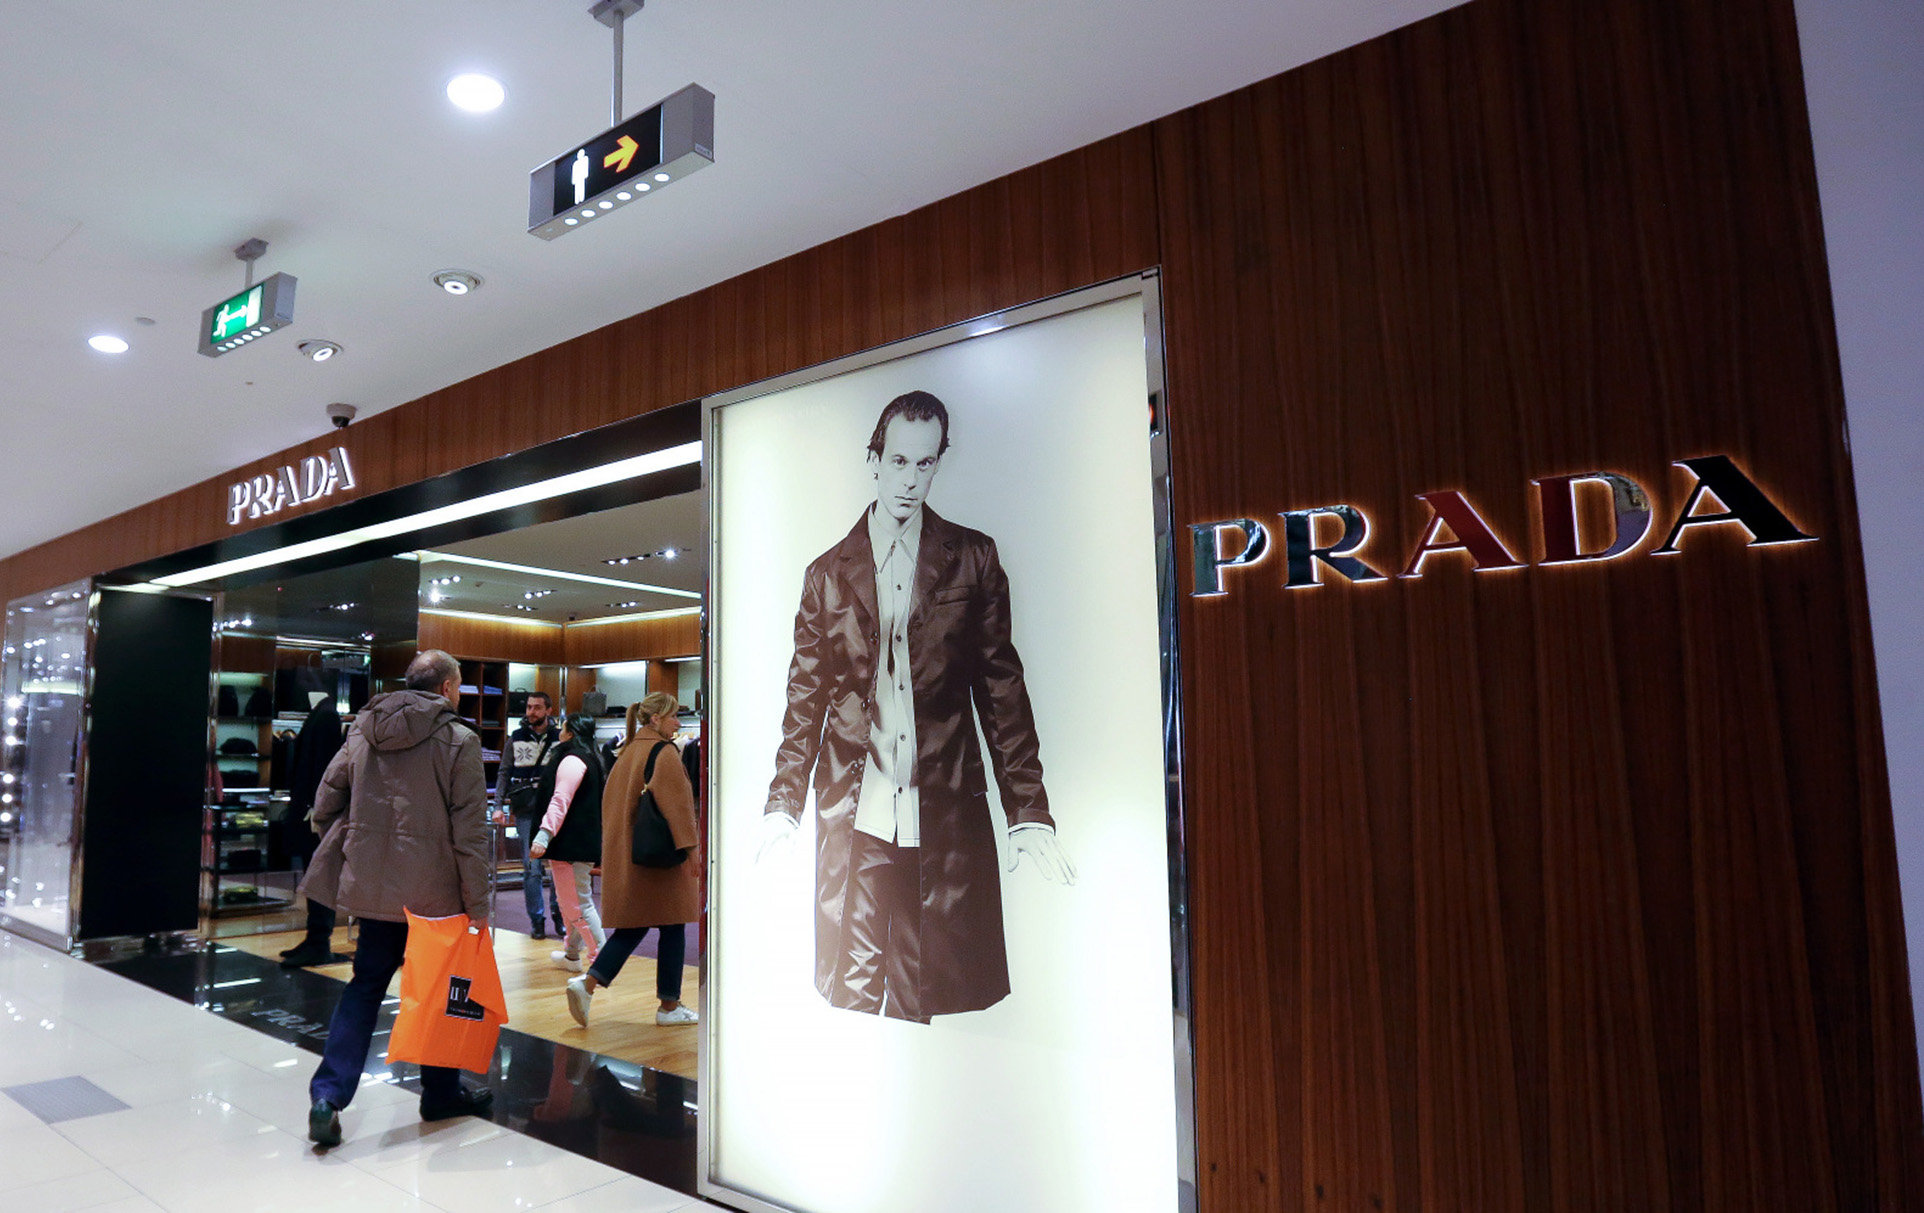 Prada Diversity Programs Laid Out After Racist Imagery Incident - Bloomberg